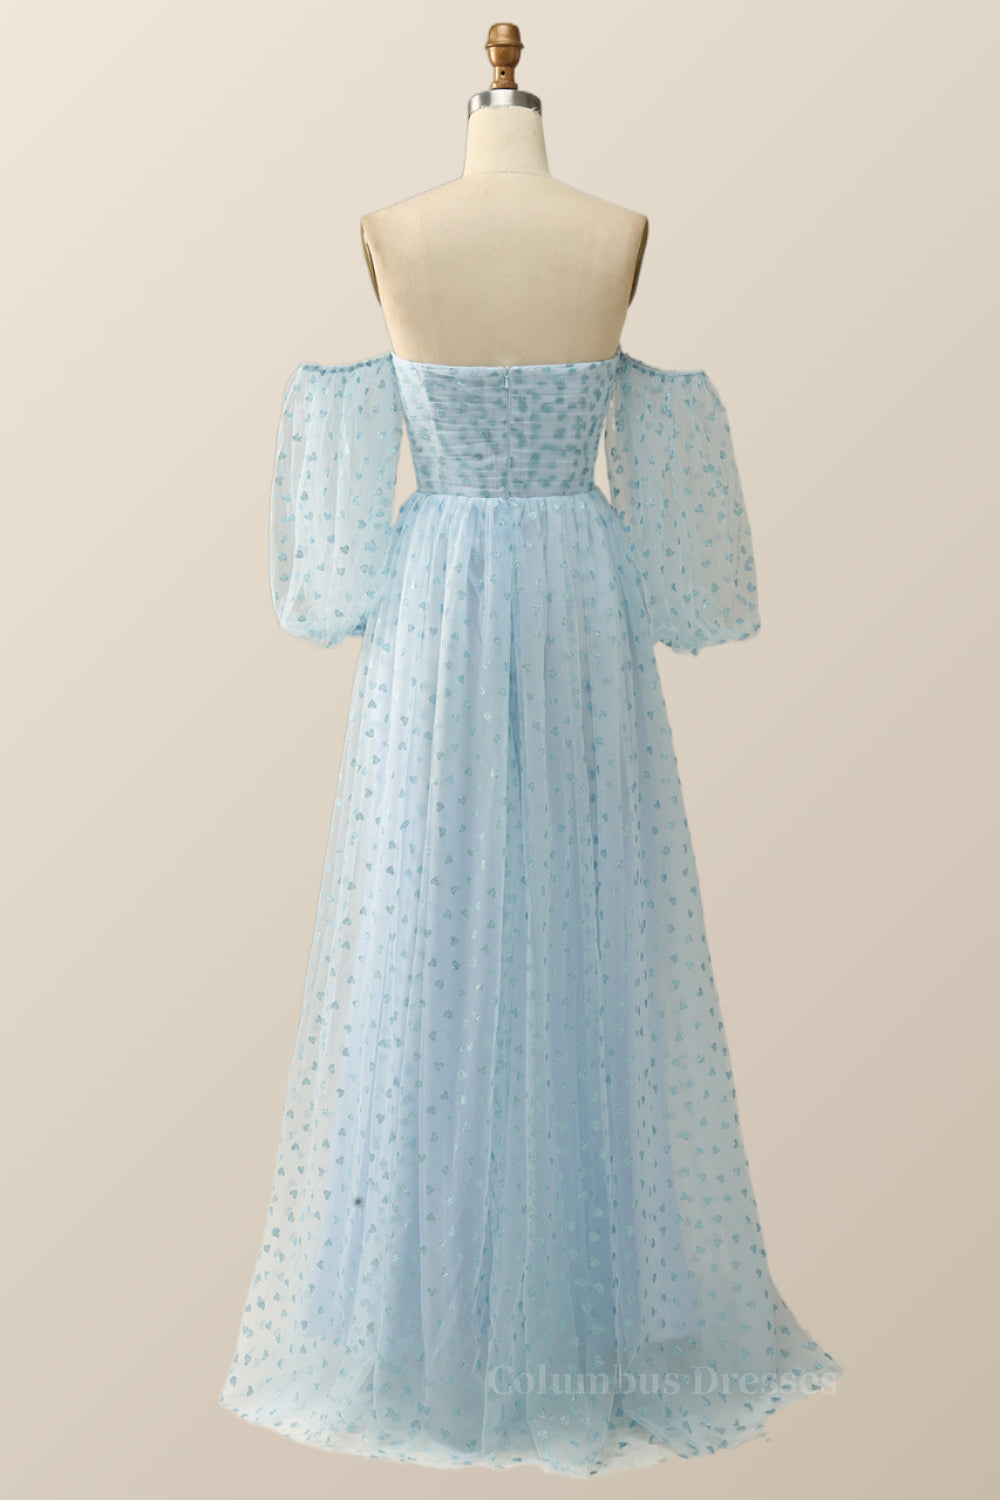 Bridesmaide Dress Colors, Blue Hearts Printed Tulle Long Formal Dress with Puffy Sleeves